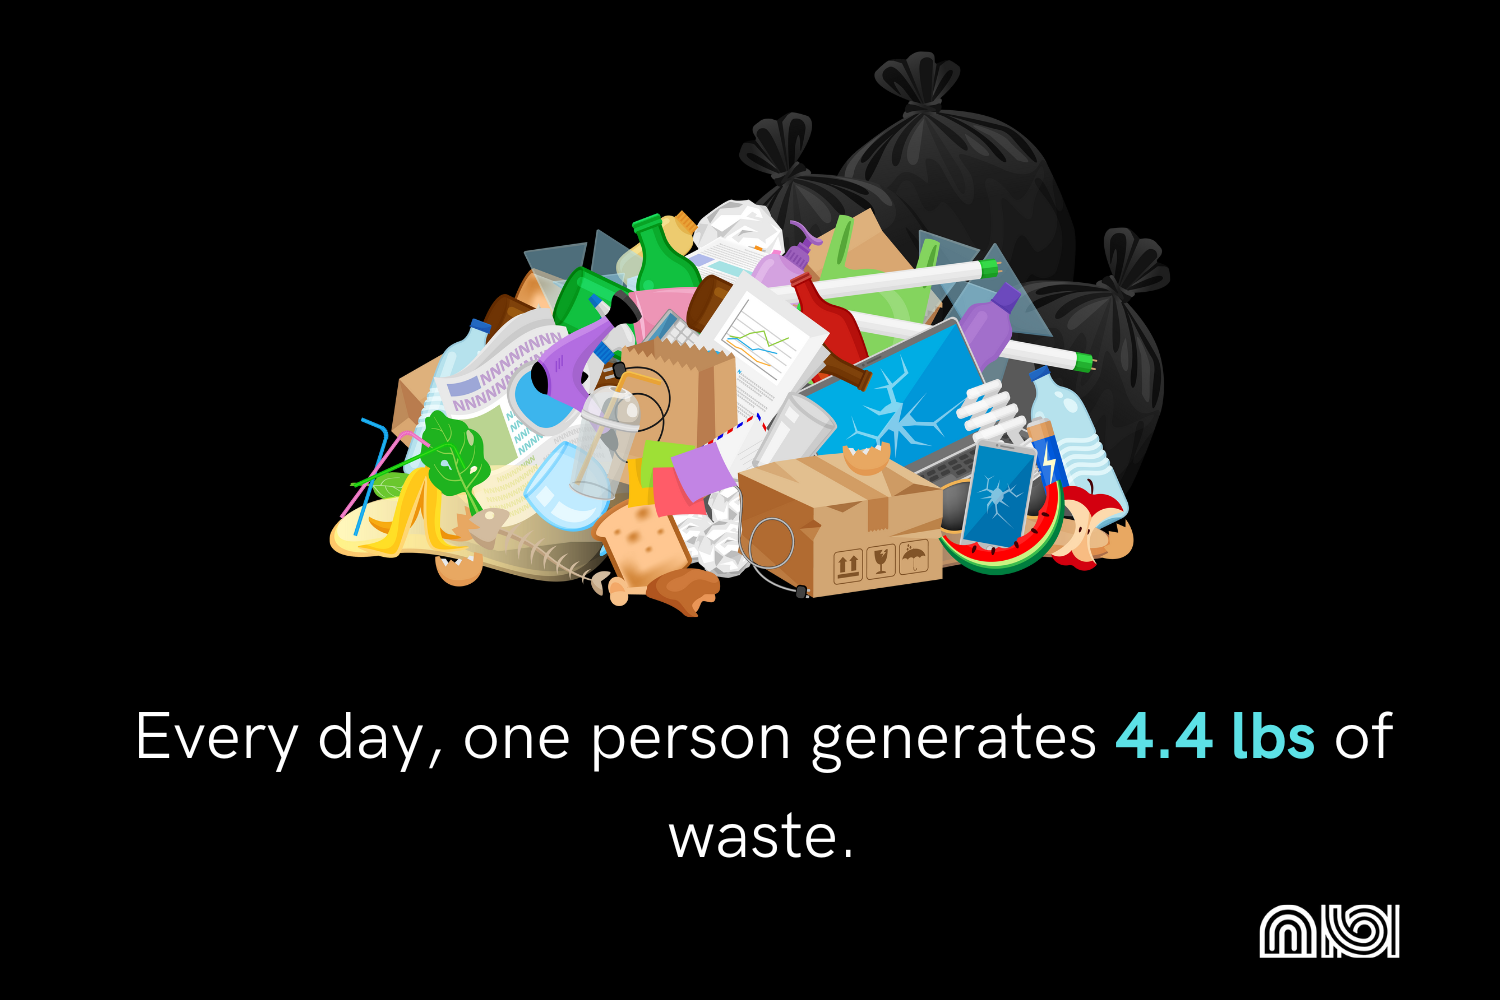 Daily human waste generation infographic.